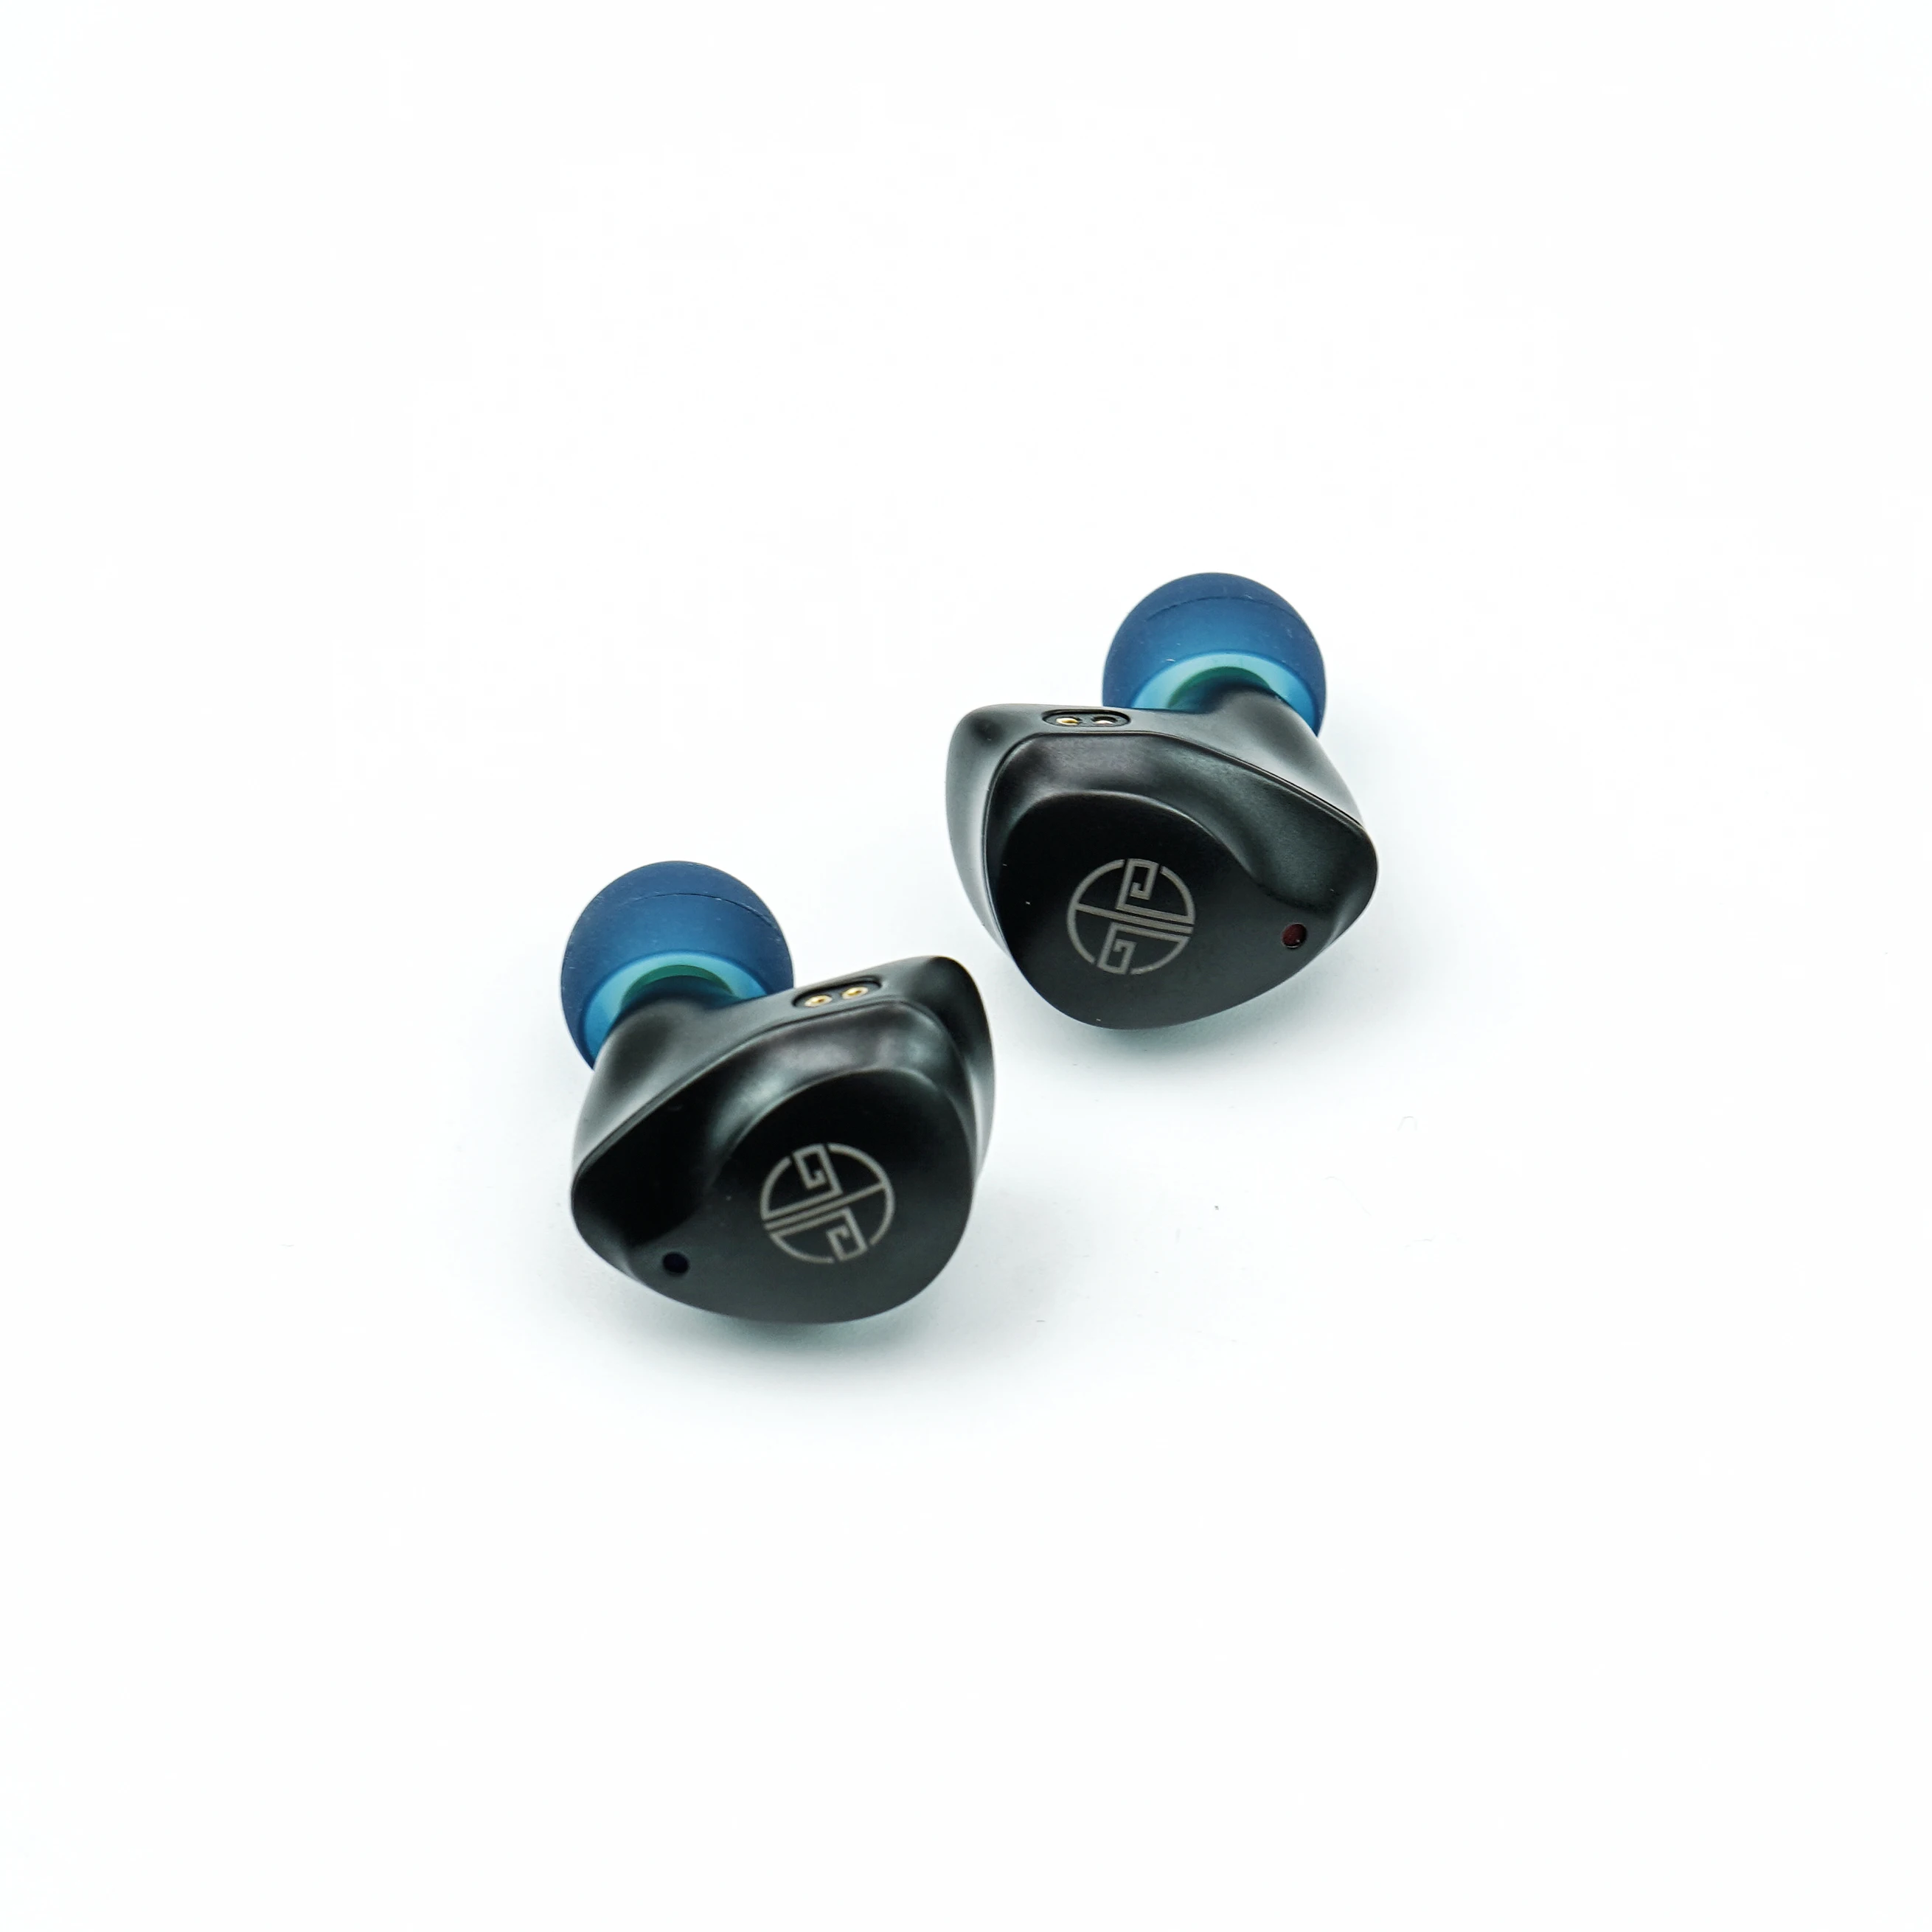 

Black Soul Yuan Li Limited Quantity HiFi In Ear Monitor Earphone Customized Dynamic Driver CNC Metal Case with OCC Cable